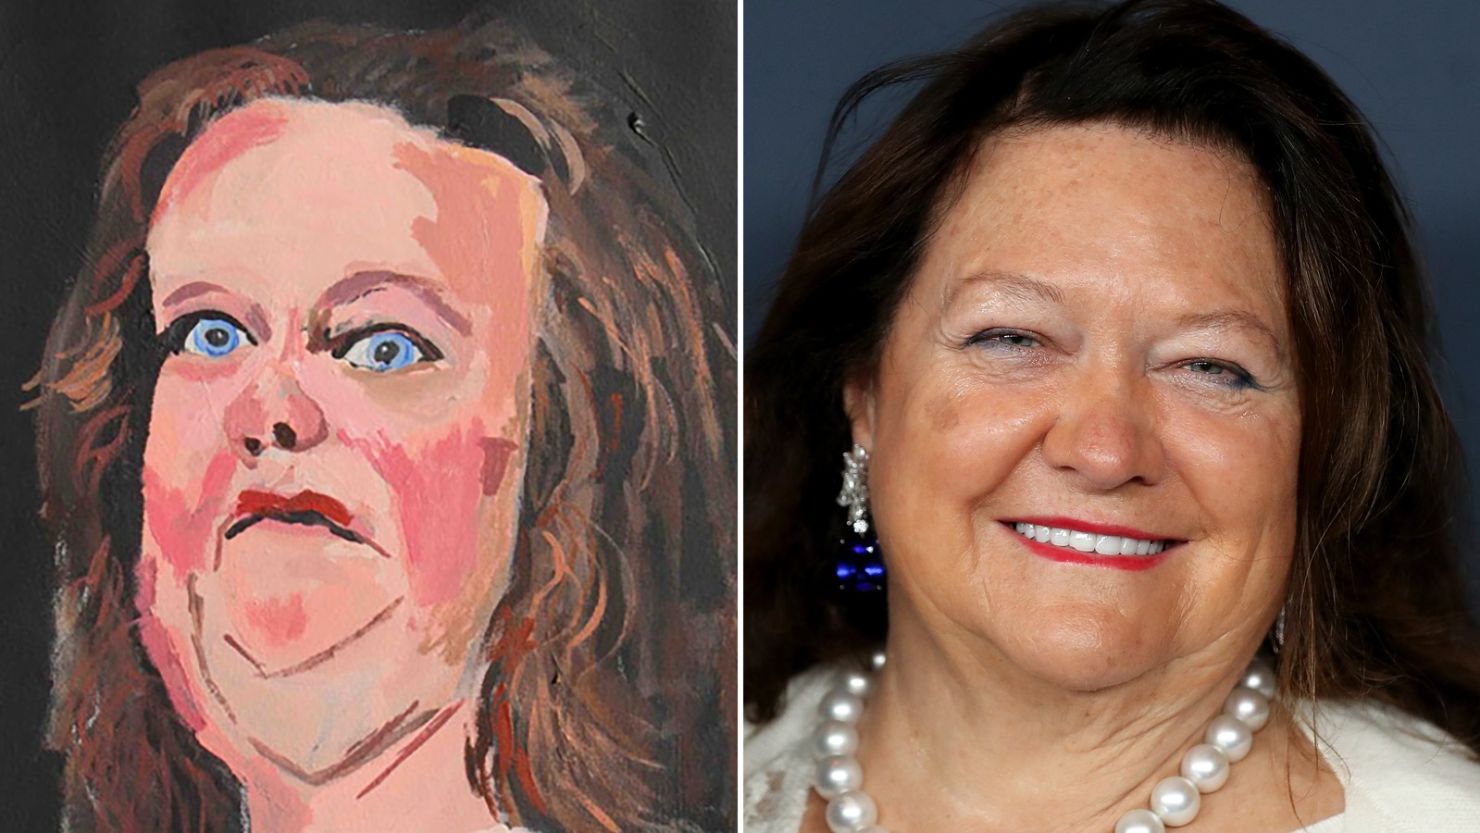 Australian billionaire Gina Rinehart has demanded that a portrait of her is removed from an exhibition at the National Gallery of Australia.